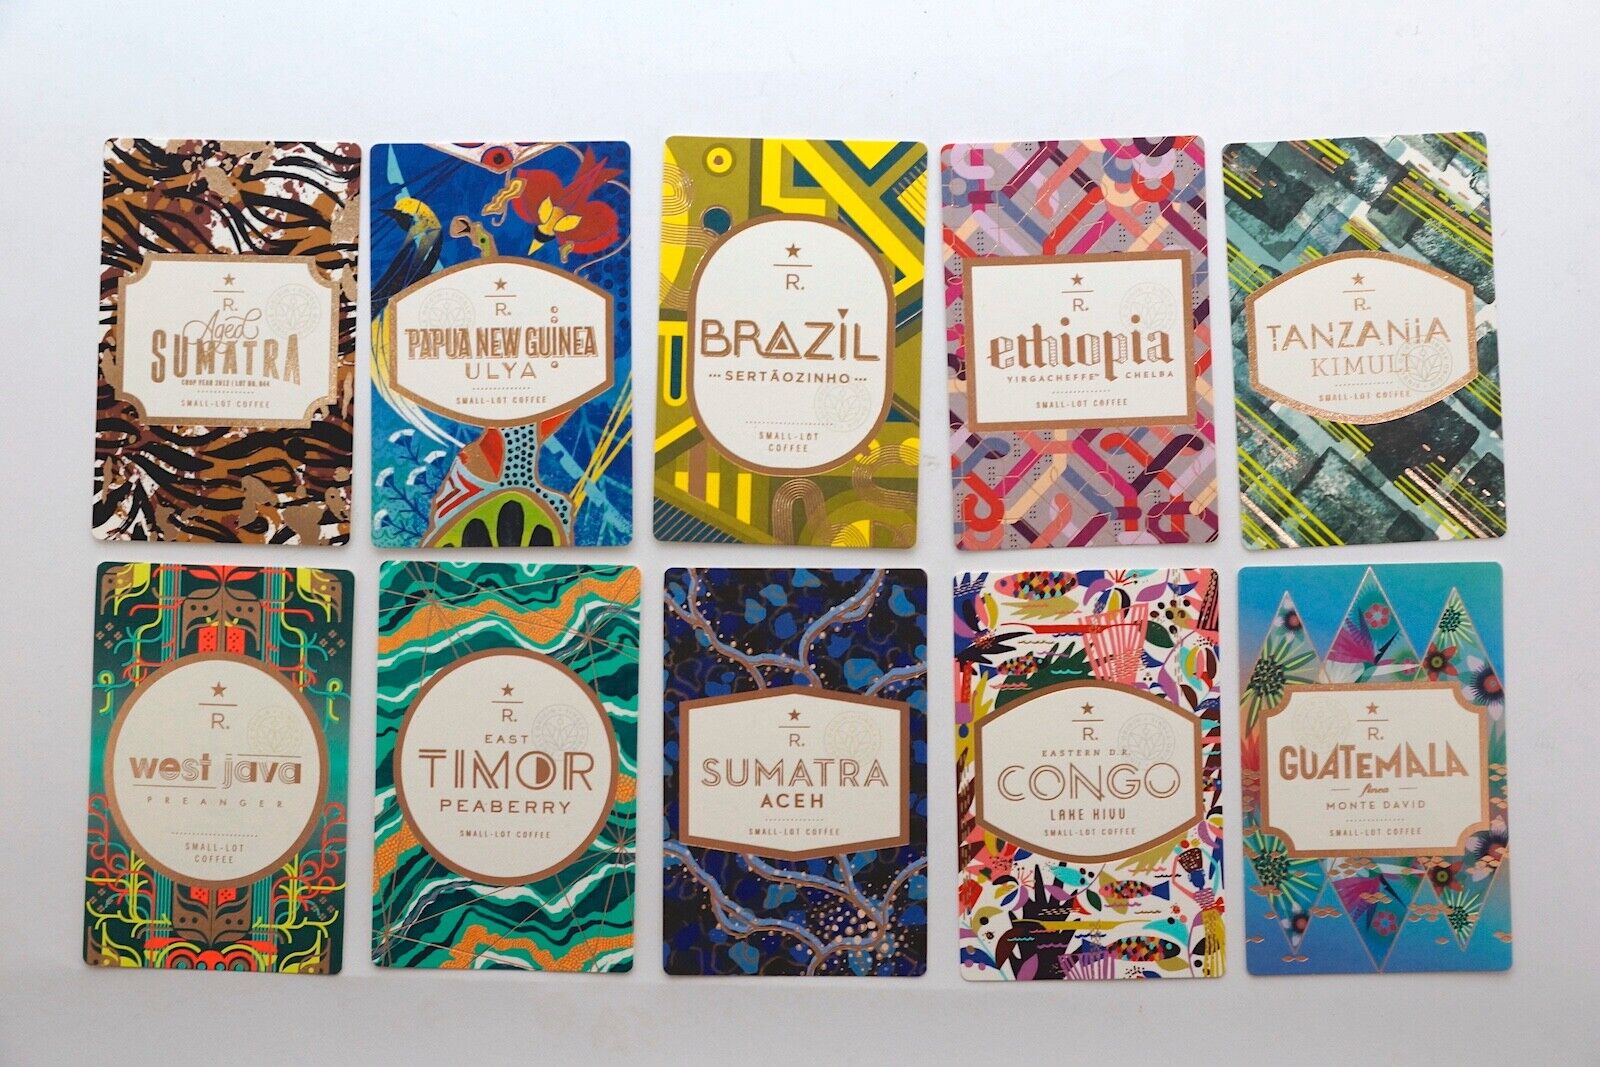 Starbucks Reserve Coffee -collector cards - Includes 10 actual cards